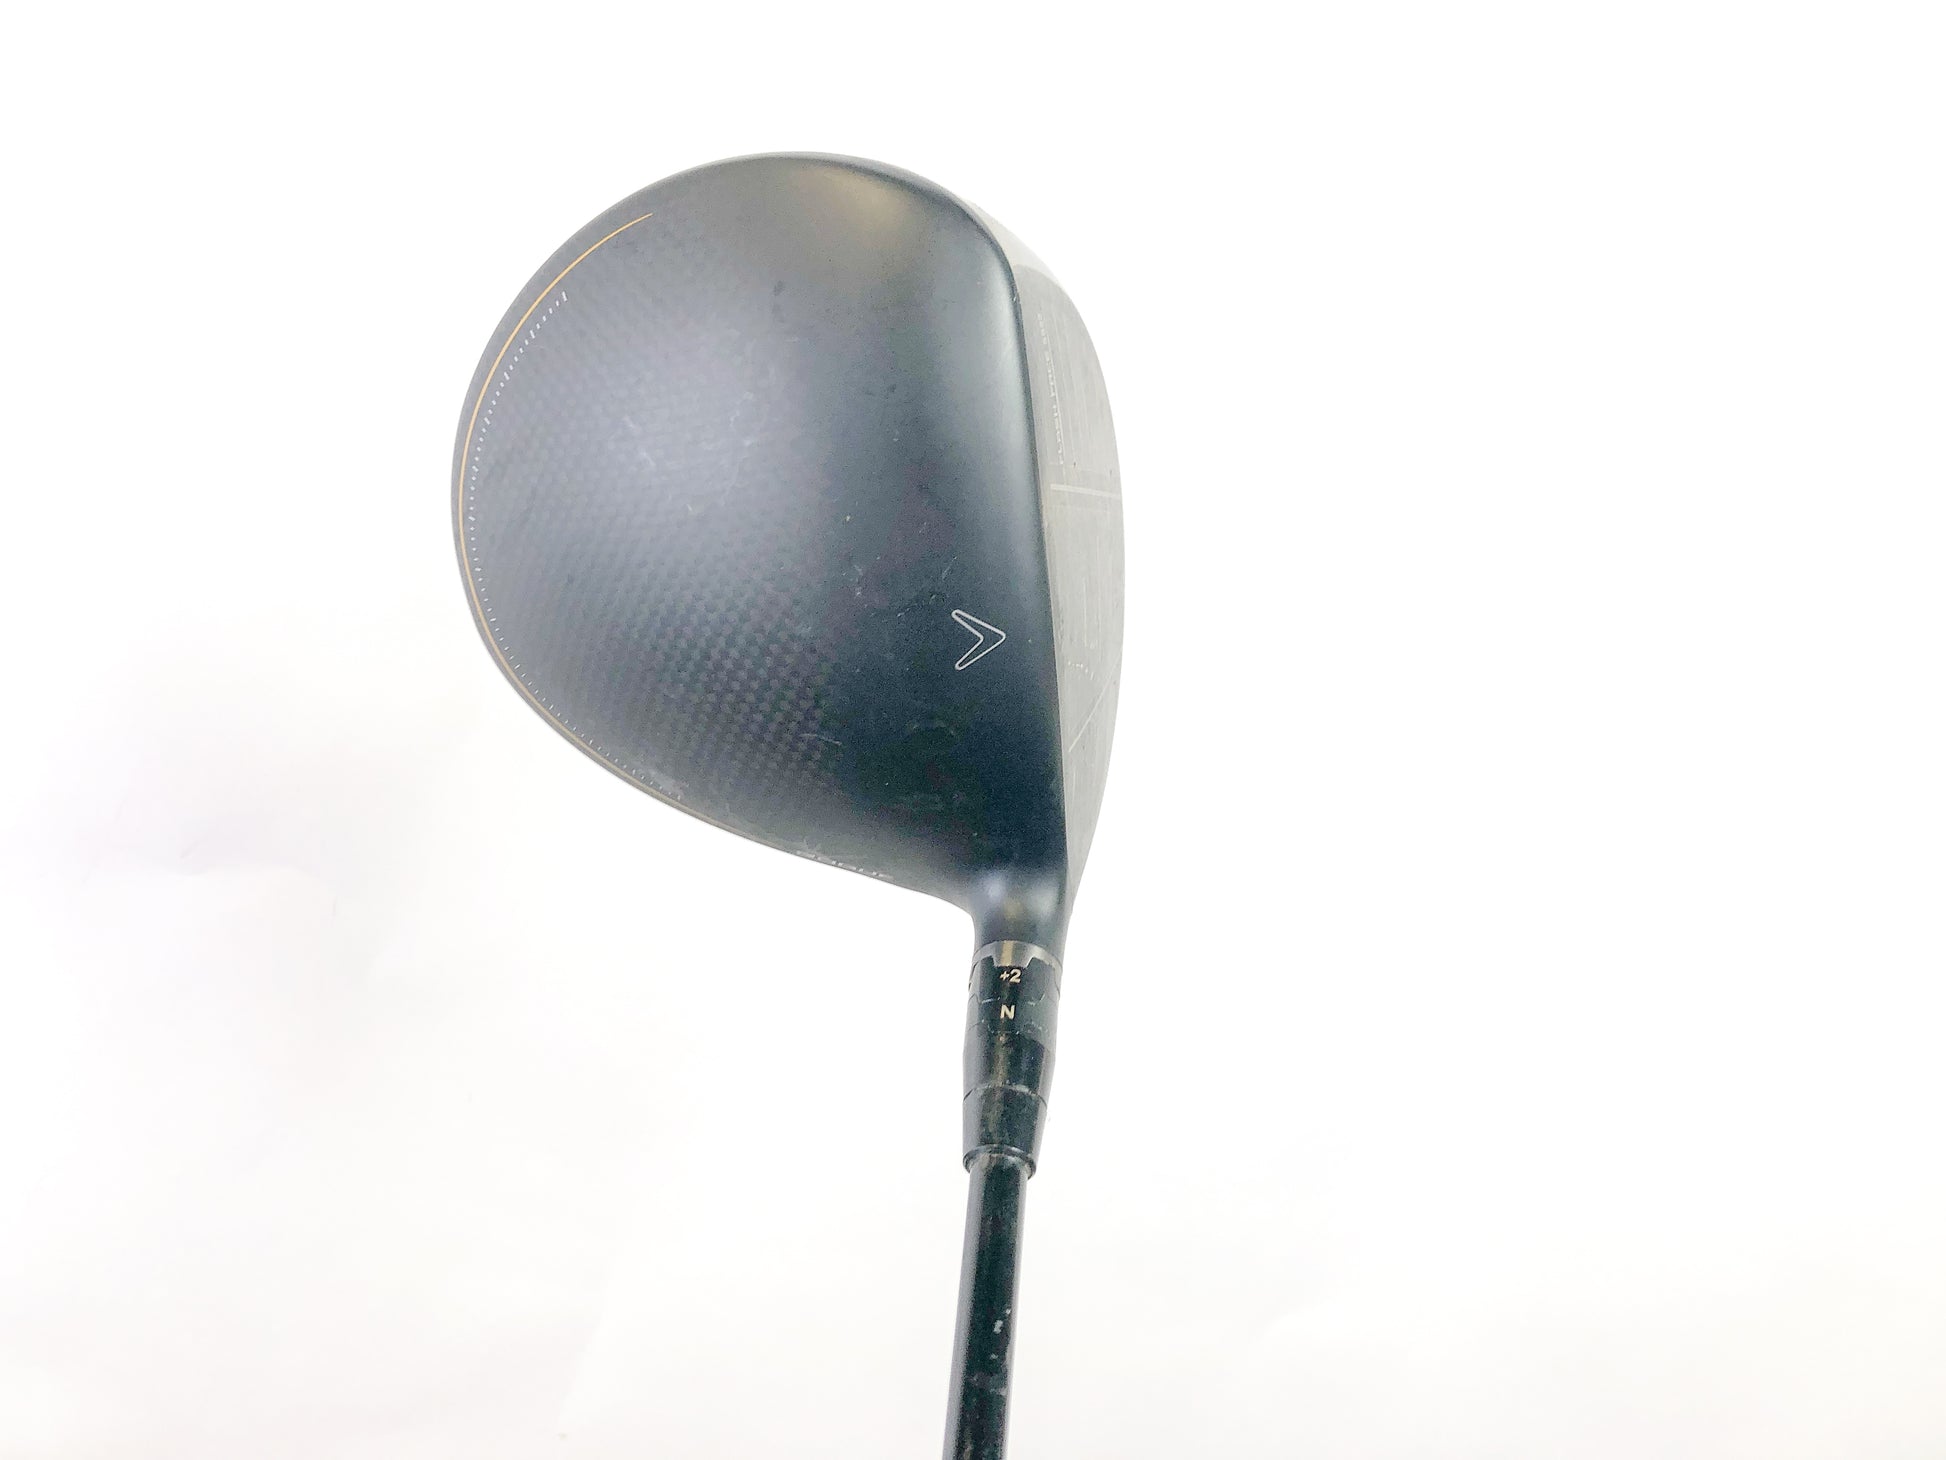 Used Callaway Rogue ST MAX Driver - Left-Handed - 9 Degrees - Soft Regular Flex-Next Round